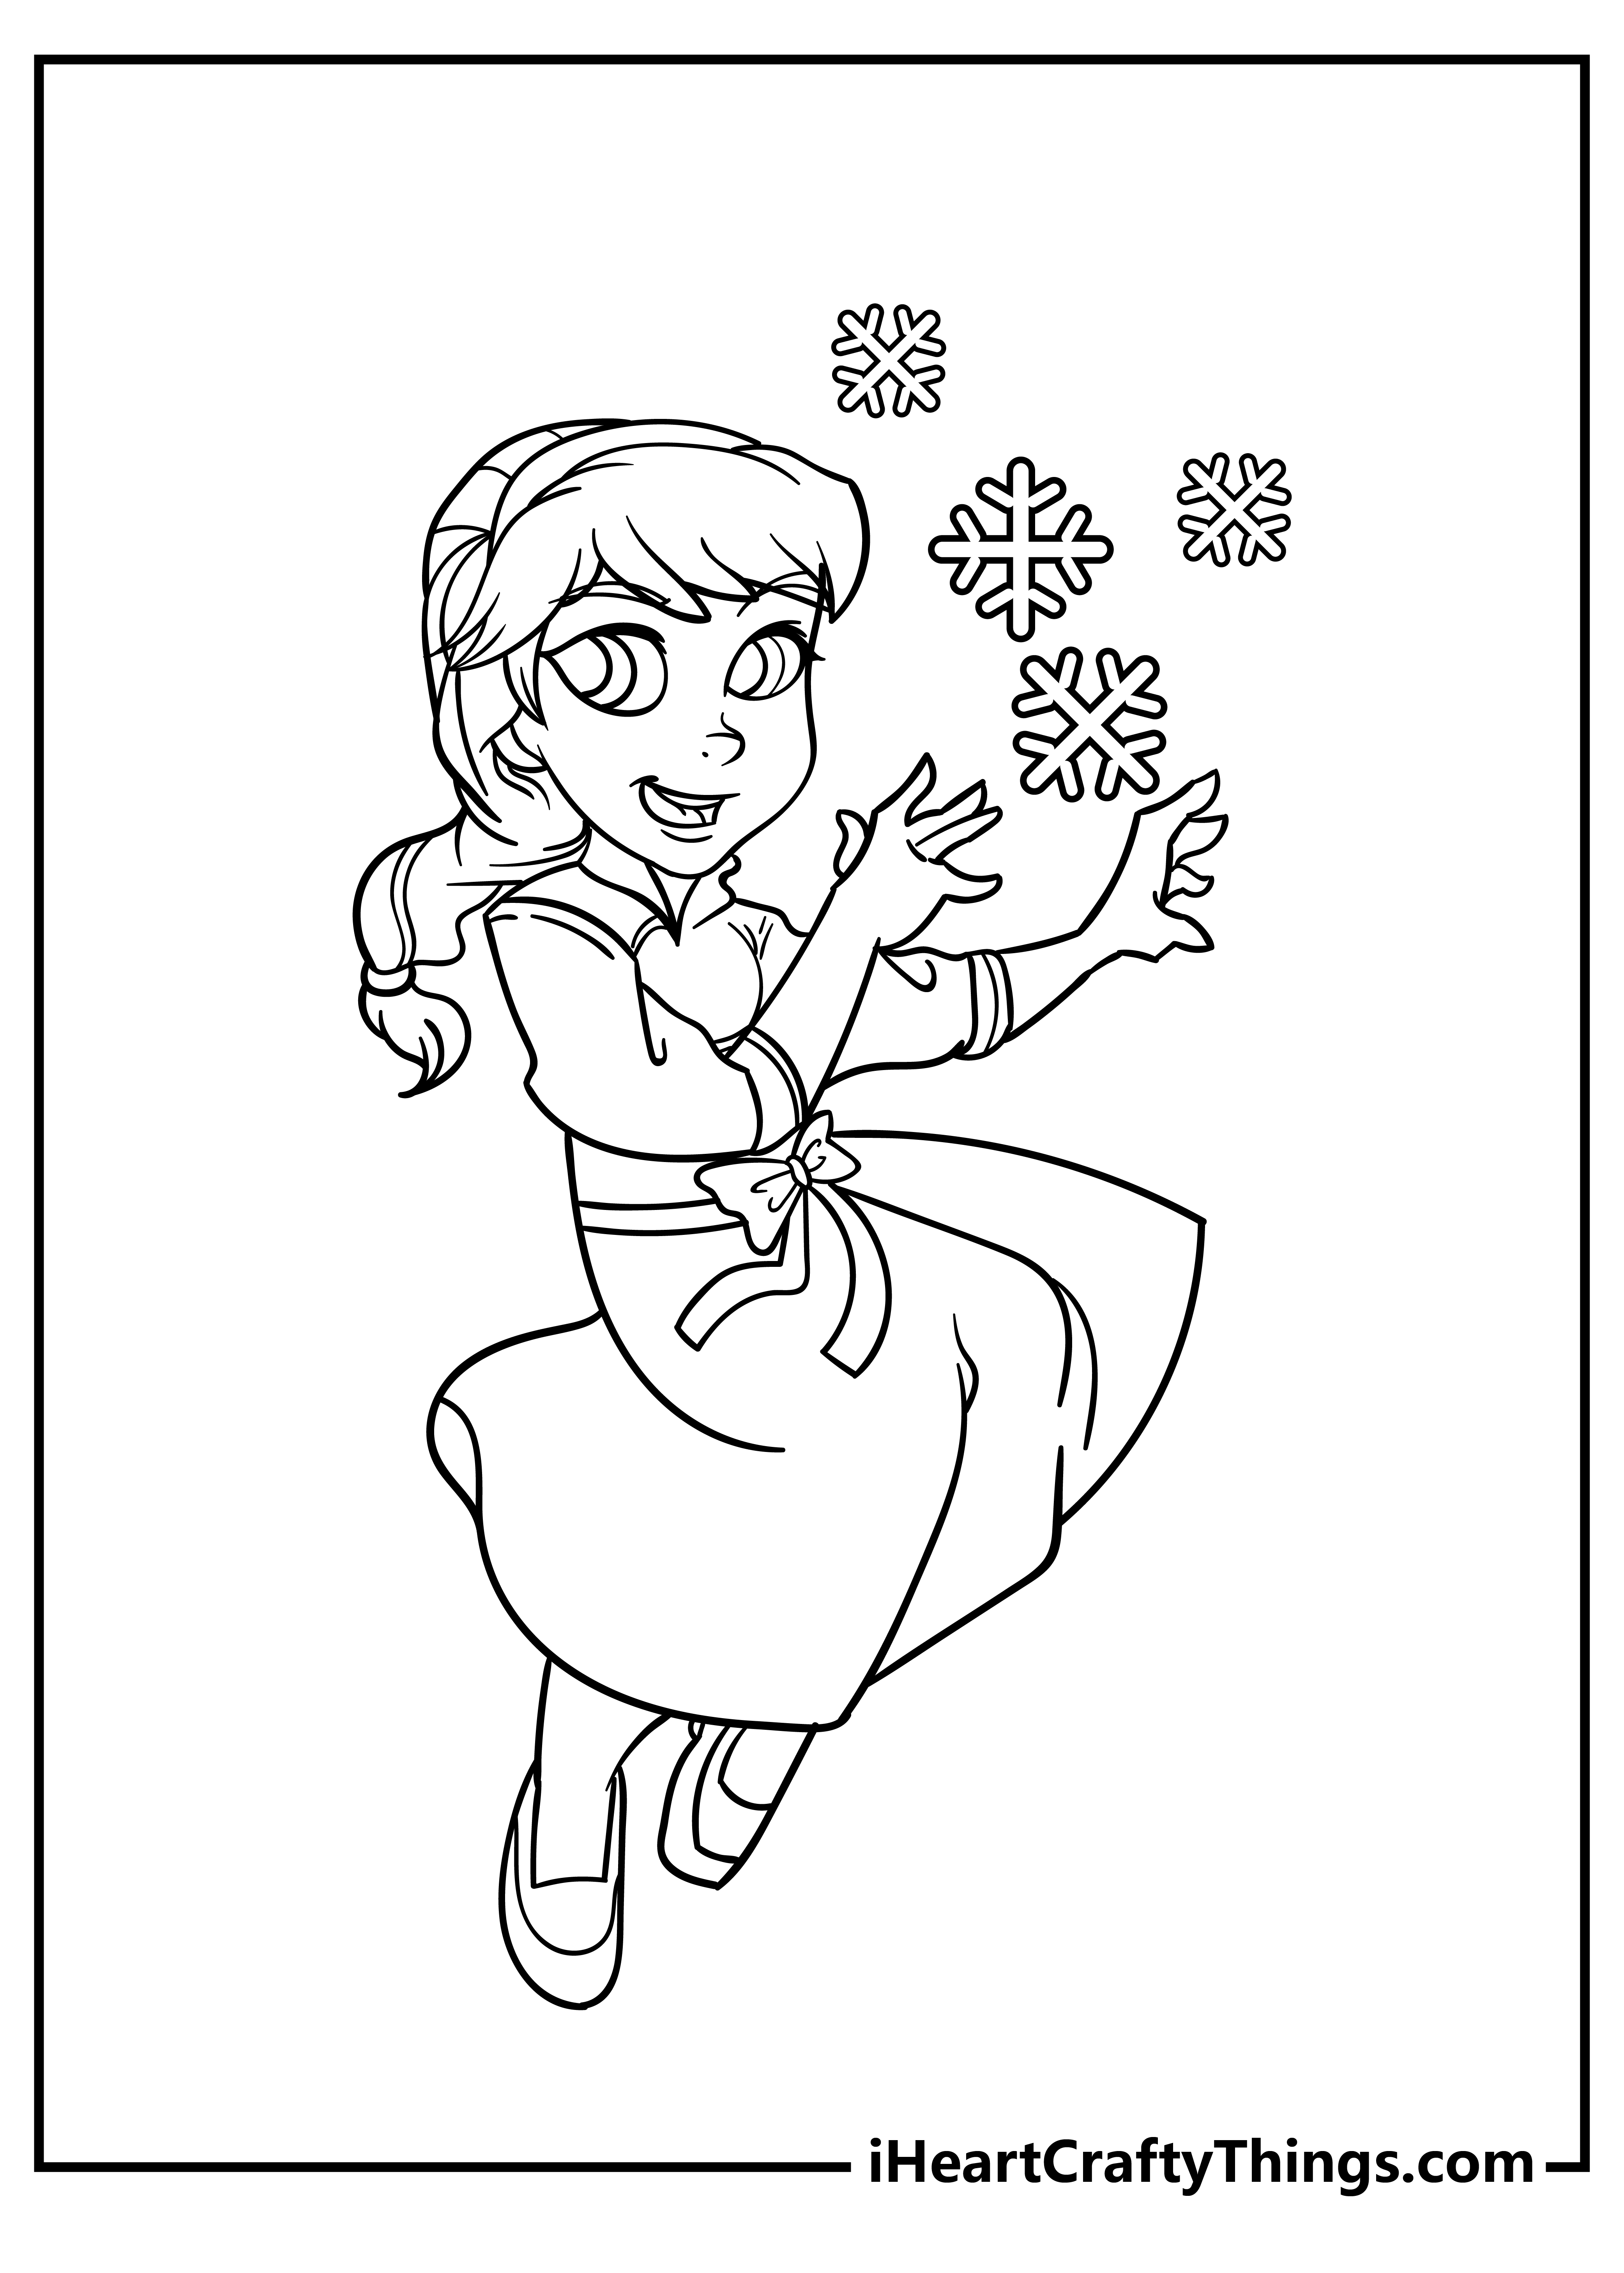 Elsa and Anna Coloring Pages for kids free download